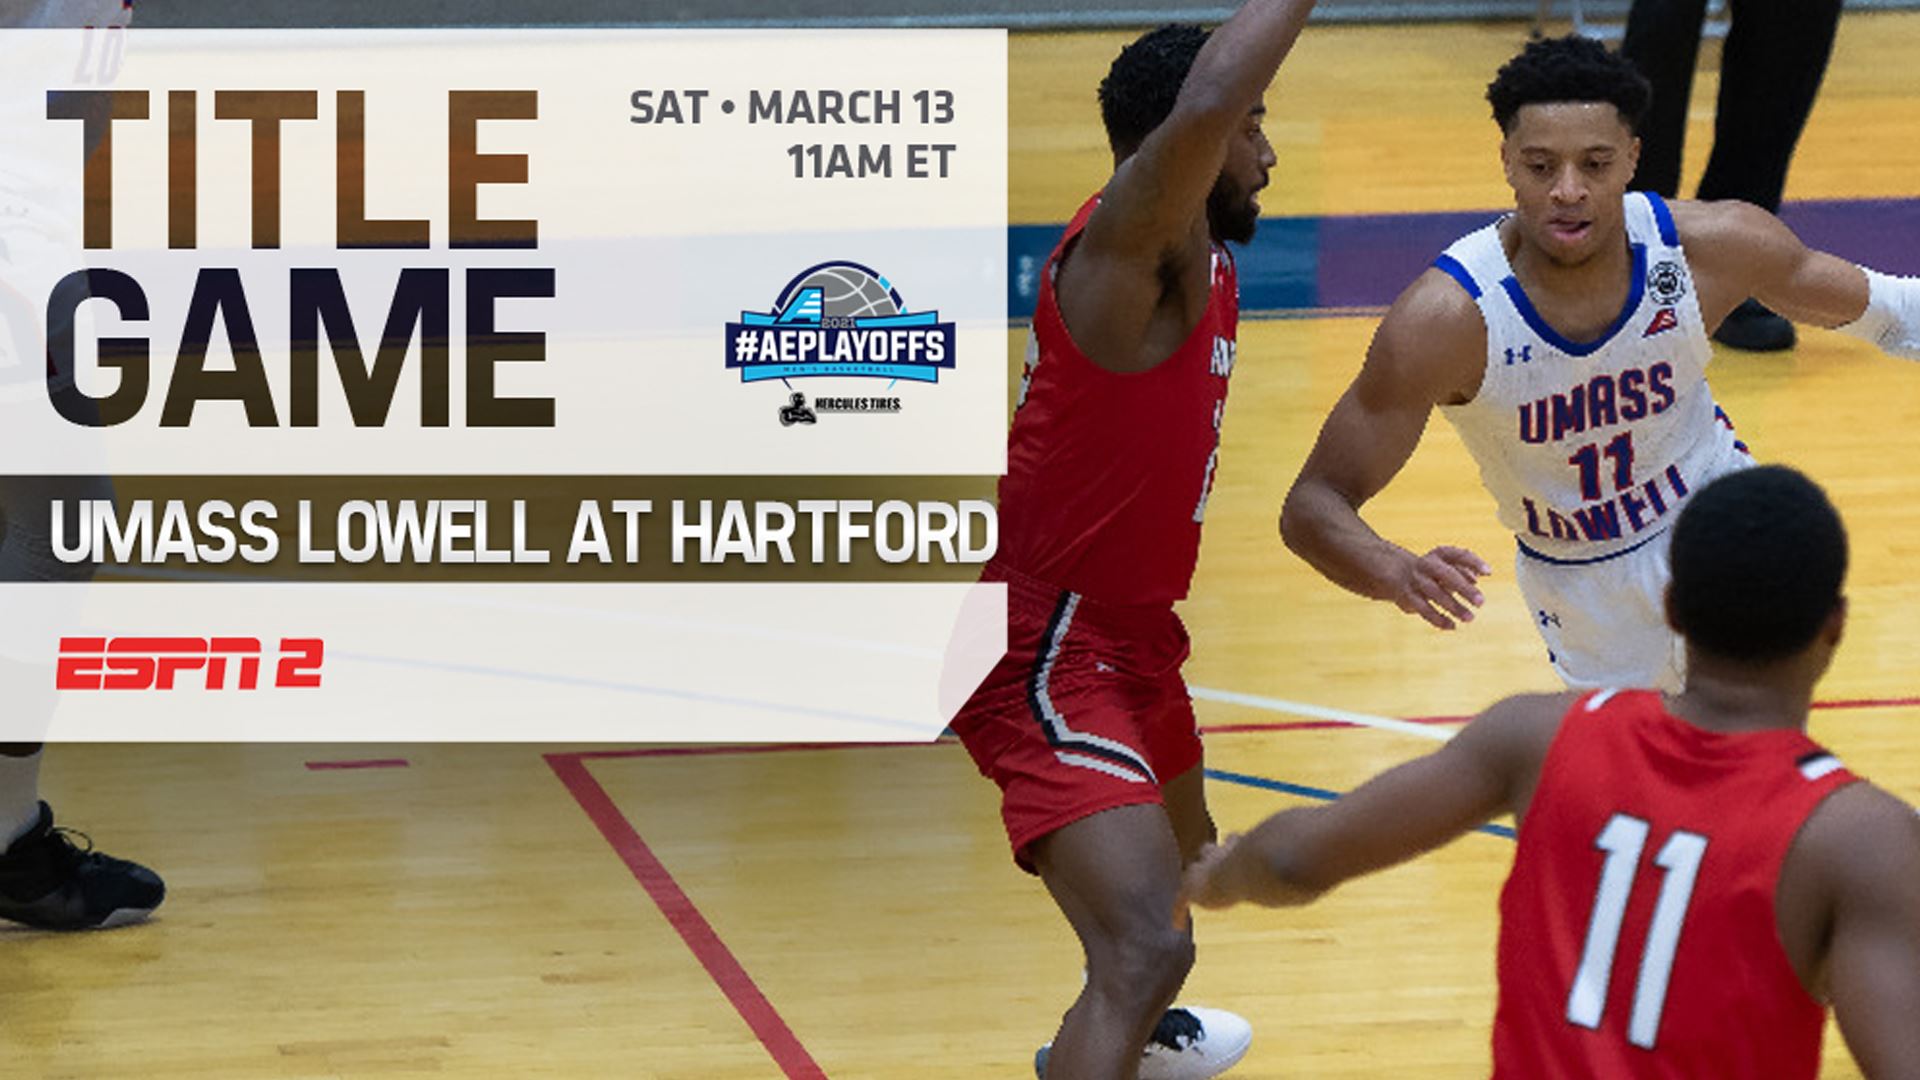 Hartford, UMass Lowell Battle to Be 1st Time Men’s #AEHoops Champion